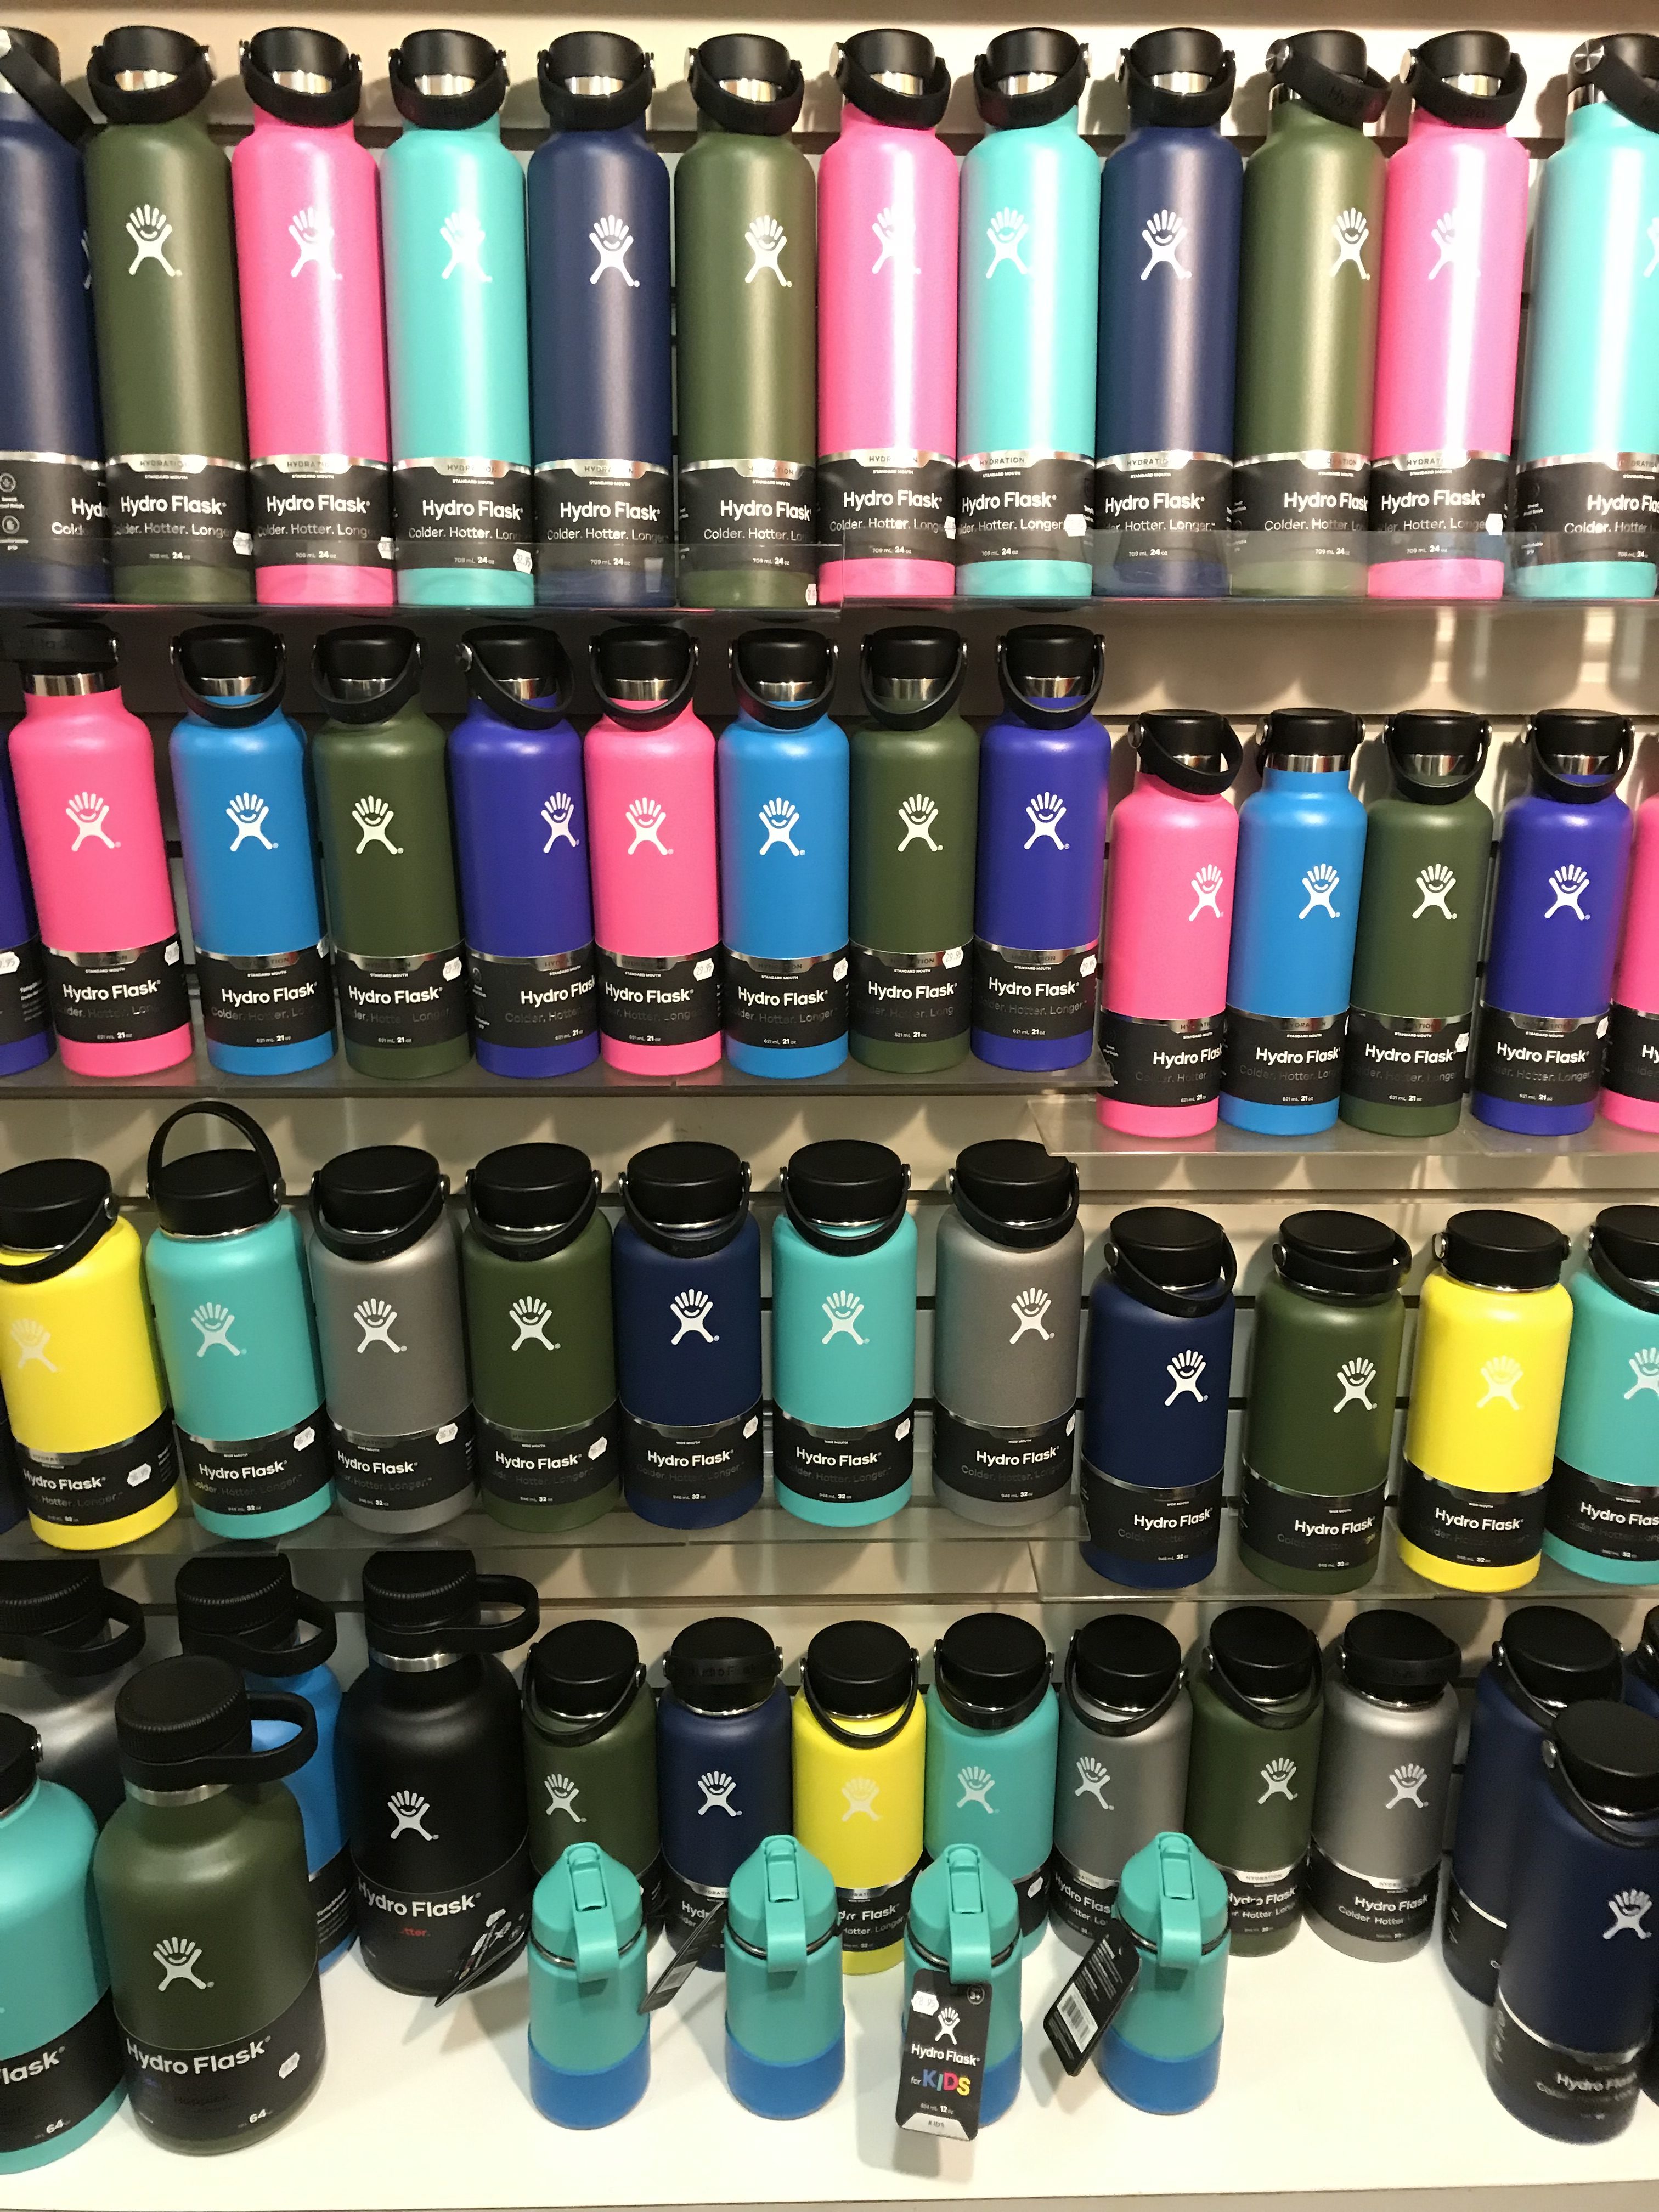 hydro flask in stores near me